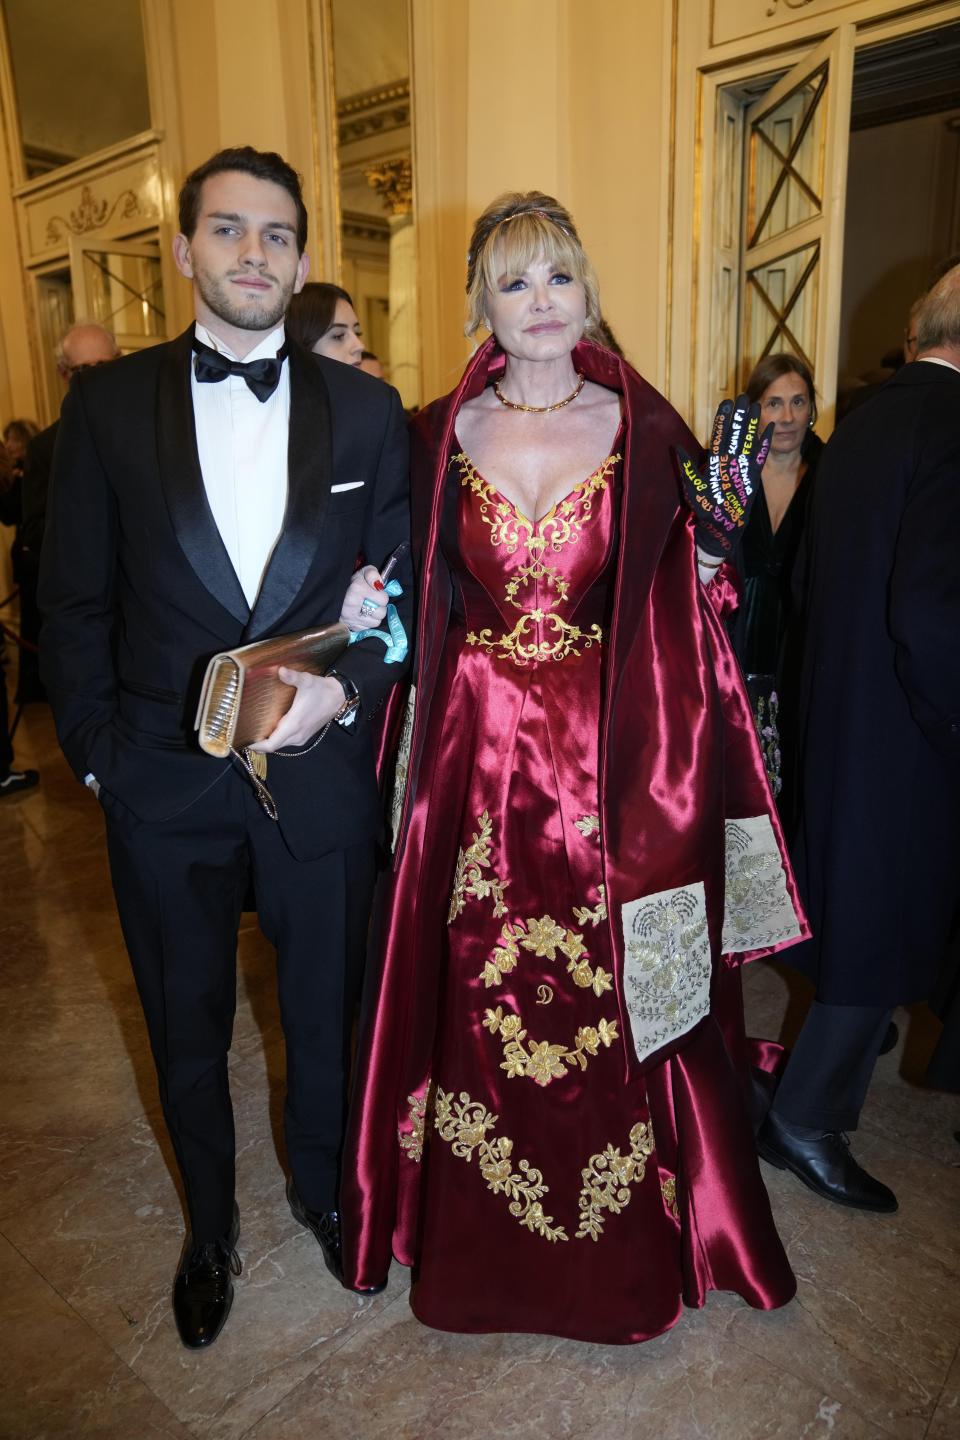 Doctor Dvora Ancona, right, arrives to attend La Scala opera house's gala season opener, Giuseppe Verdi's opera 'Don Carlo' at the Milan La Scala theater, Italy, Thursday Dec. 7, 2023. The season-opener Thursday, held each year on the Milan feast day St. Ambrose, is considered one of the highlights of the European cultural calendar. (AP Photo/Luca Bruno)